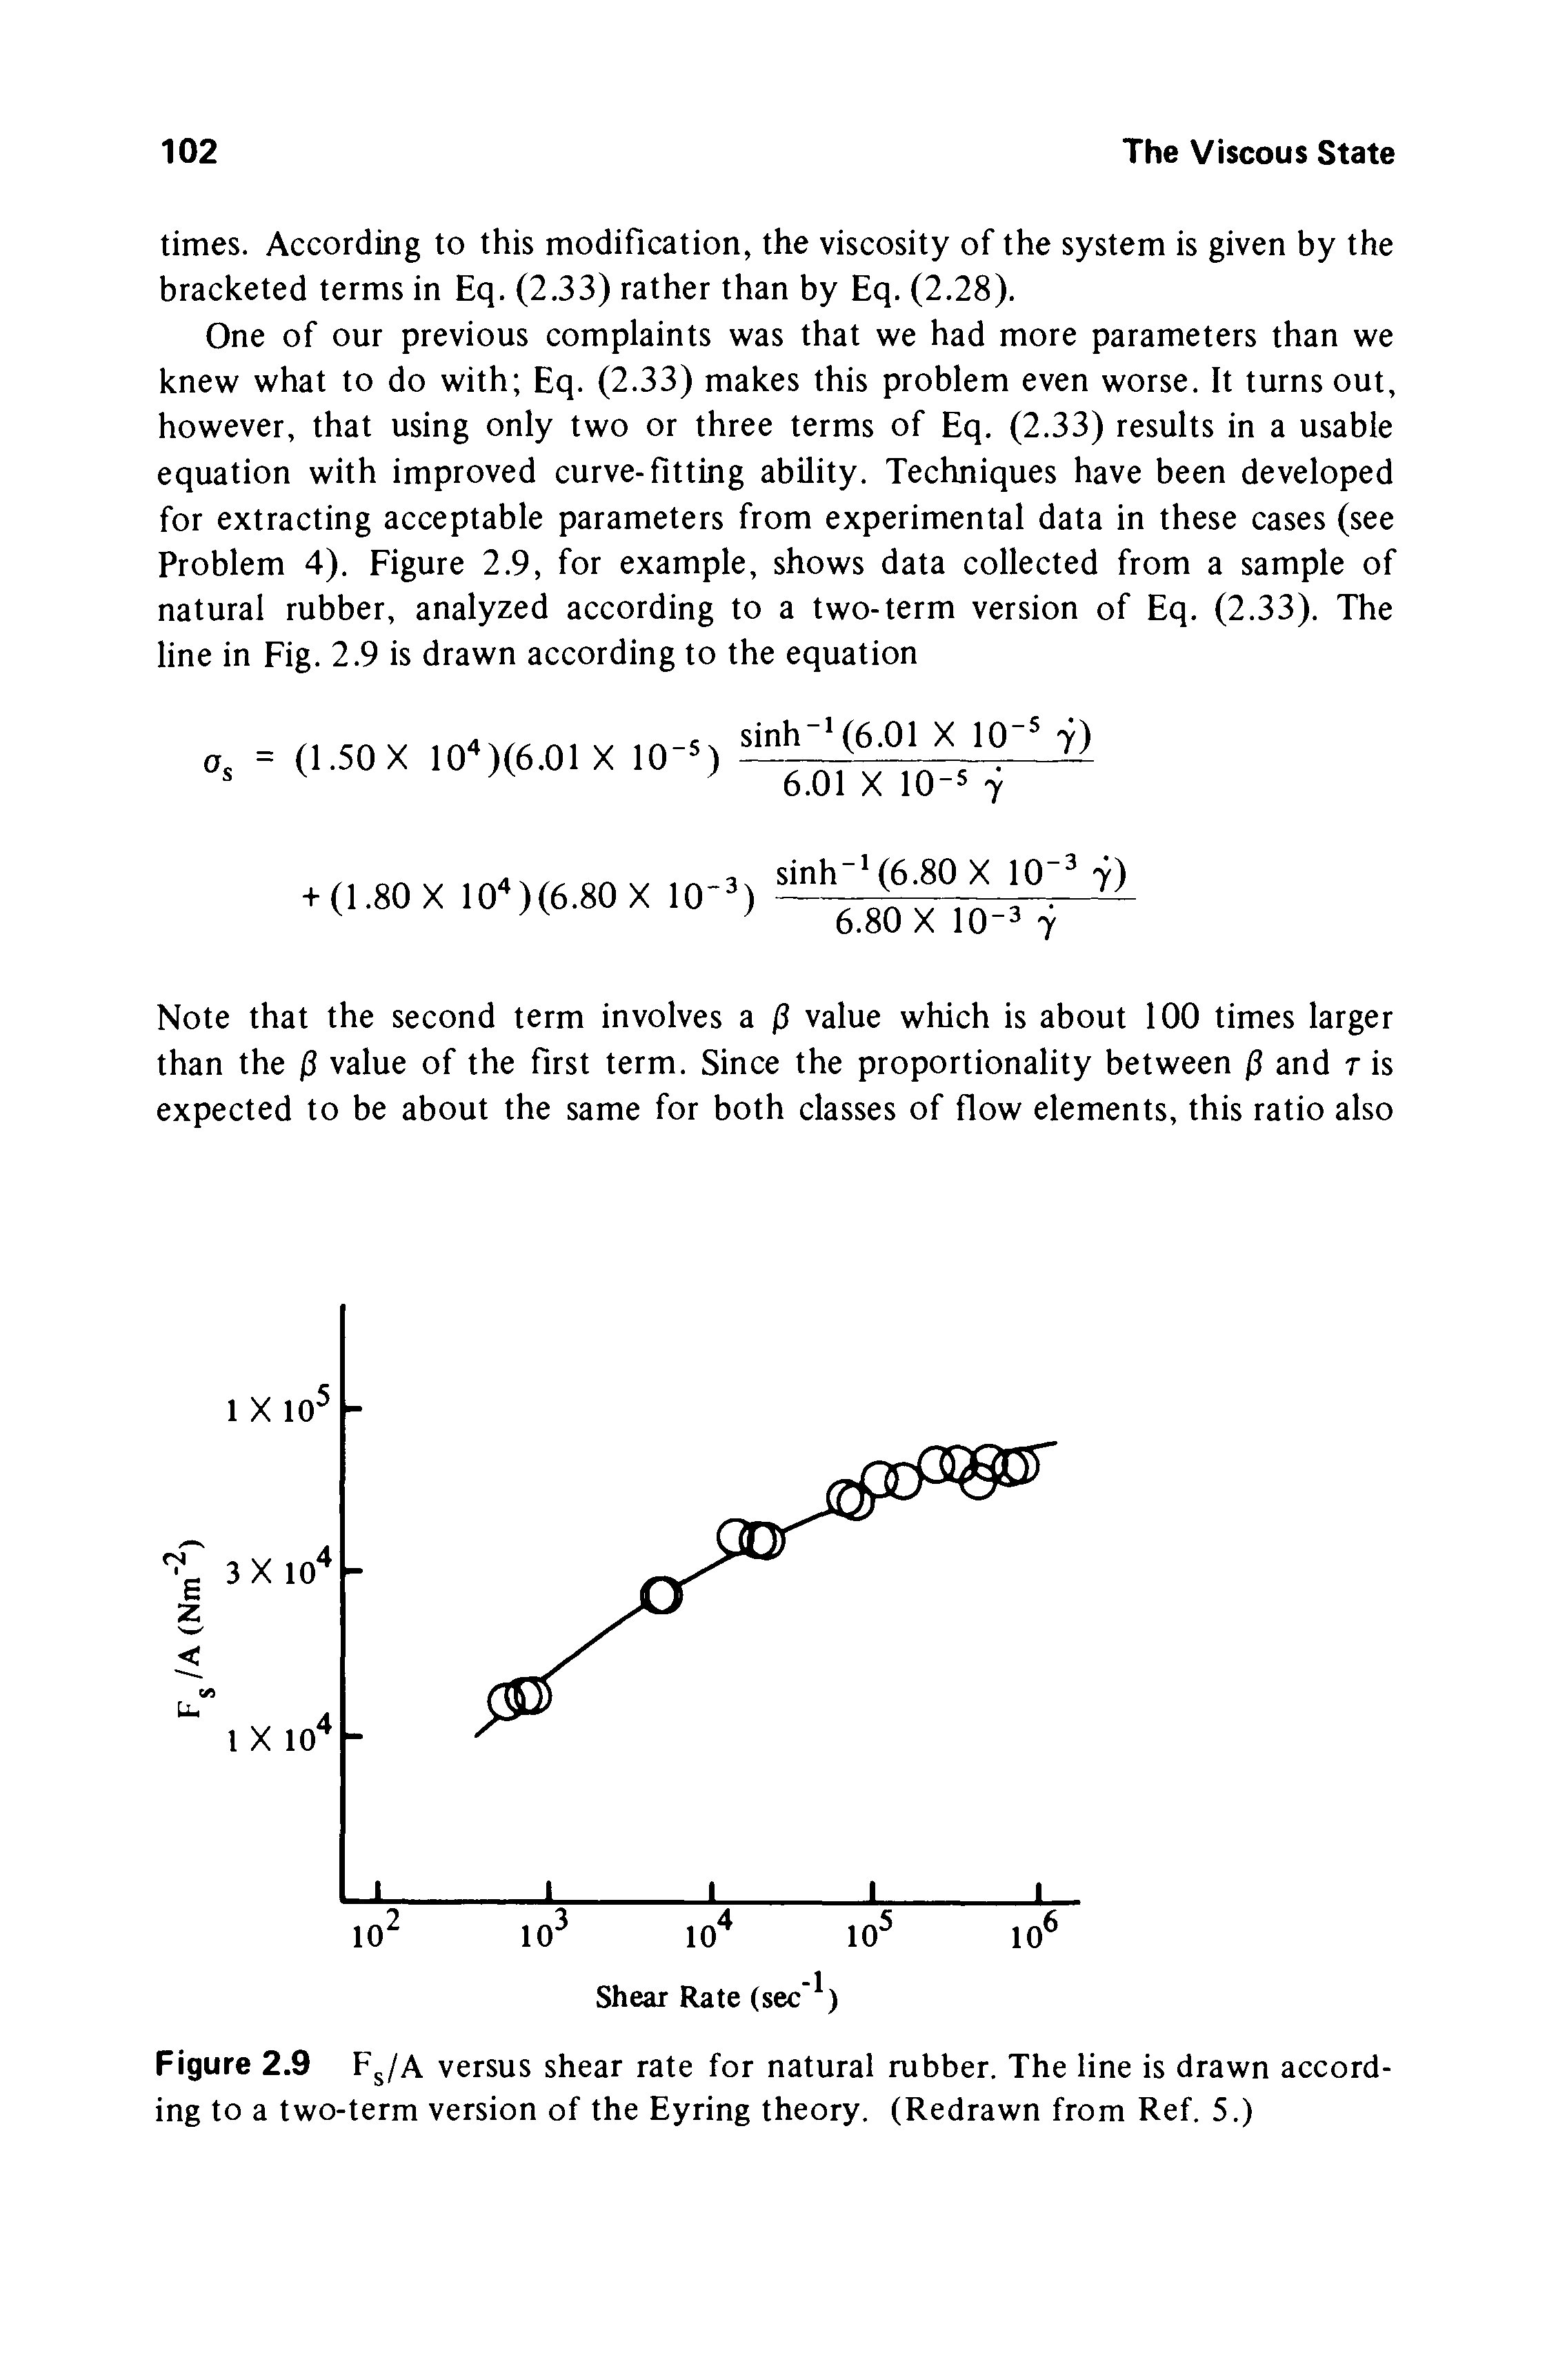 Figure 2.9 F /A versus shear rate for natural rubber. The line is drawn according to a two-term version of the Eyring theory. (Redrawn from Ref. 5.)...